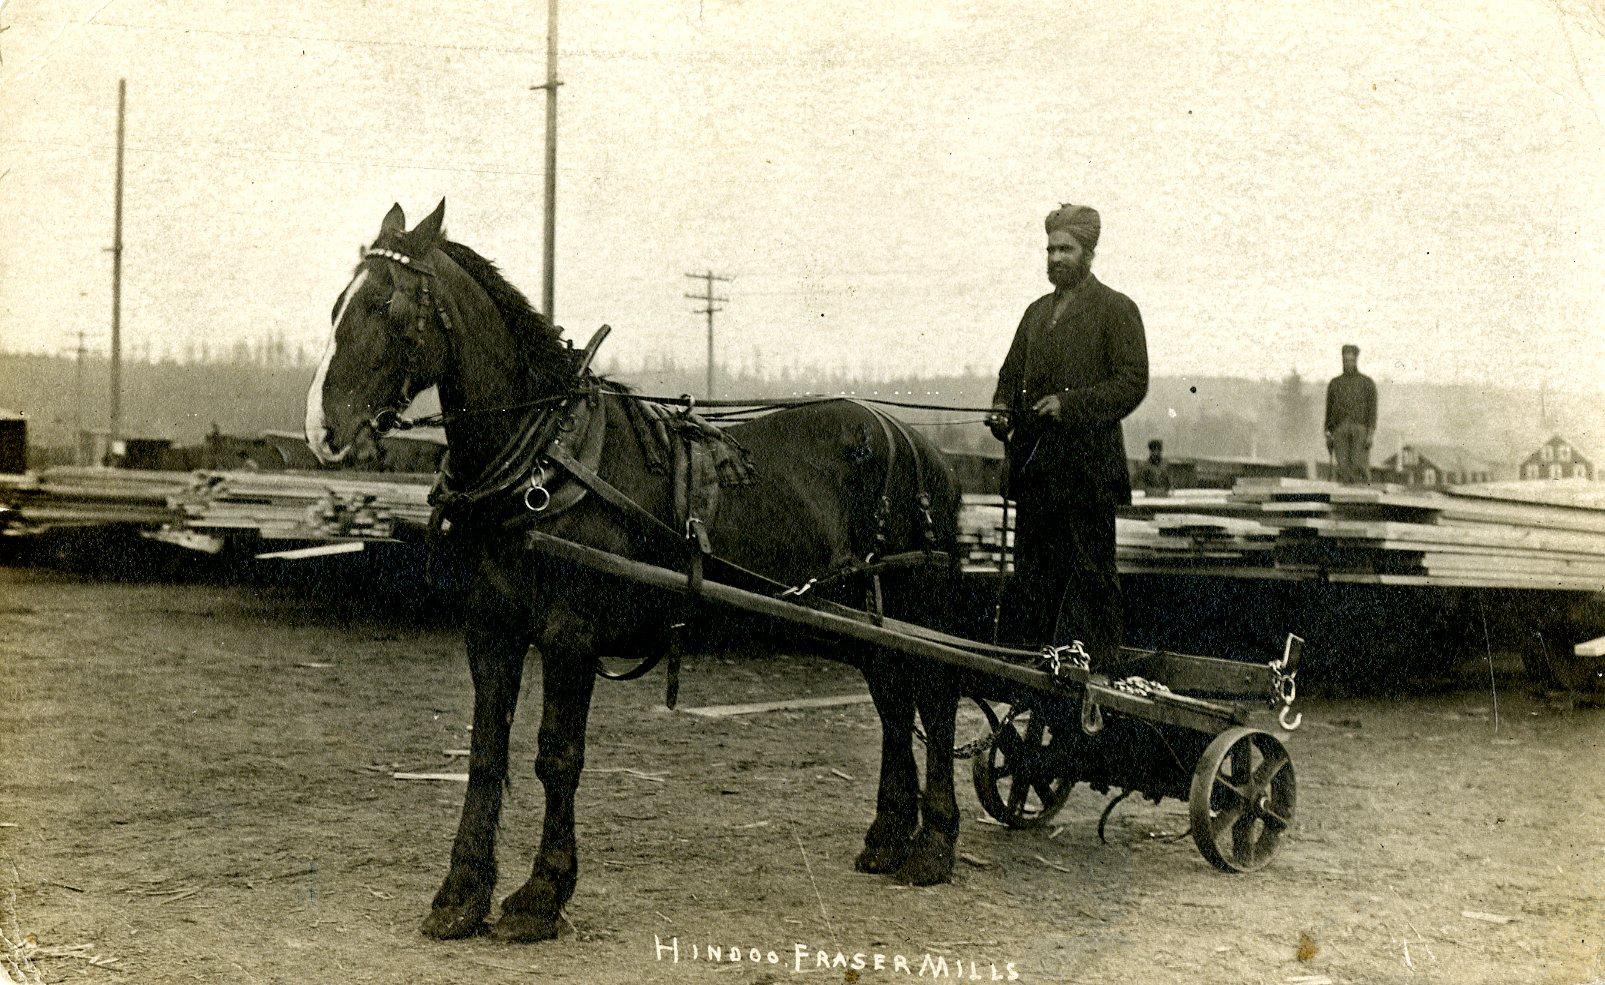 A black-and-white photograph displaying a mill worker standing on a horse-drawn cart at Fraser Mills. The text reads: “Hindoo Fraser Mills.”